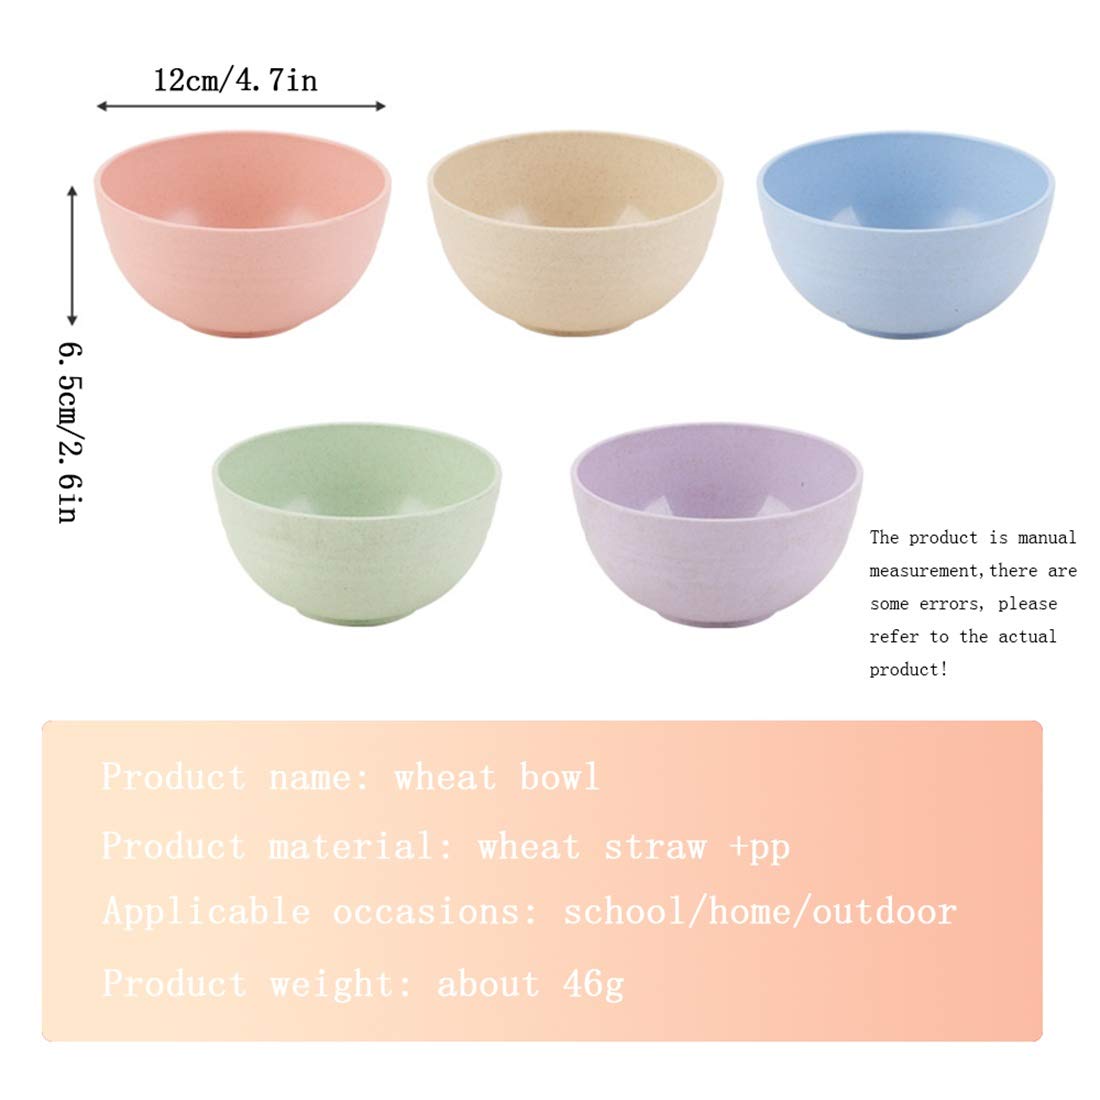 NANAOUS Small Bowls Set of 5, 14 OZ Reusable Wheat Straw Bowl, Kitchen Bowls for Dessert Bowls for Serving Soup, Oatmeal, Pasta and Salad(Purple)